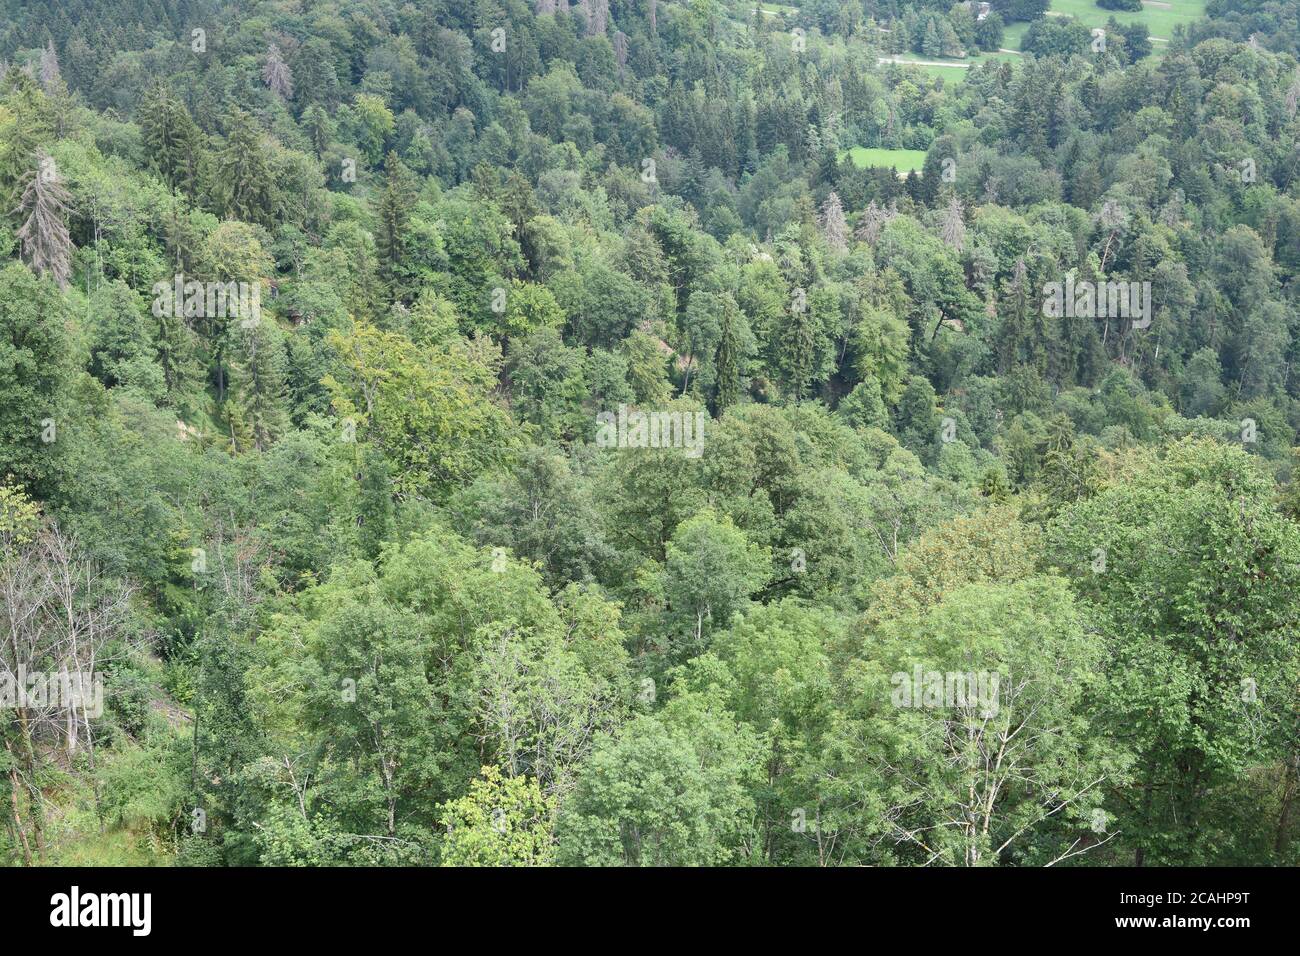 Bird's eye view on mixed green forest from Uto Kulm or Uetliberg mountain in Switzerland during sunny summer day. Stock Photo